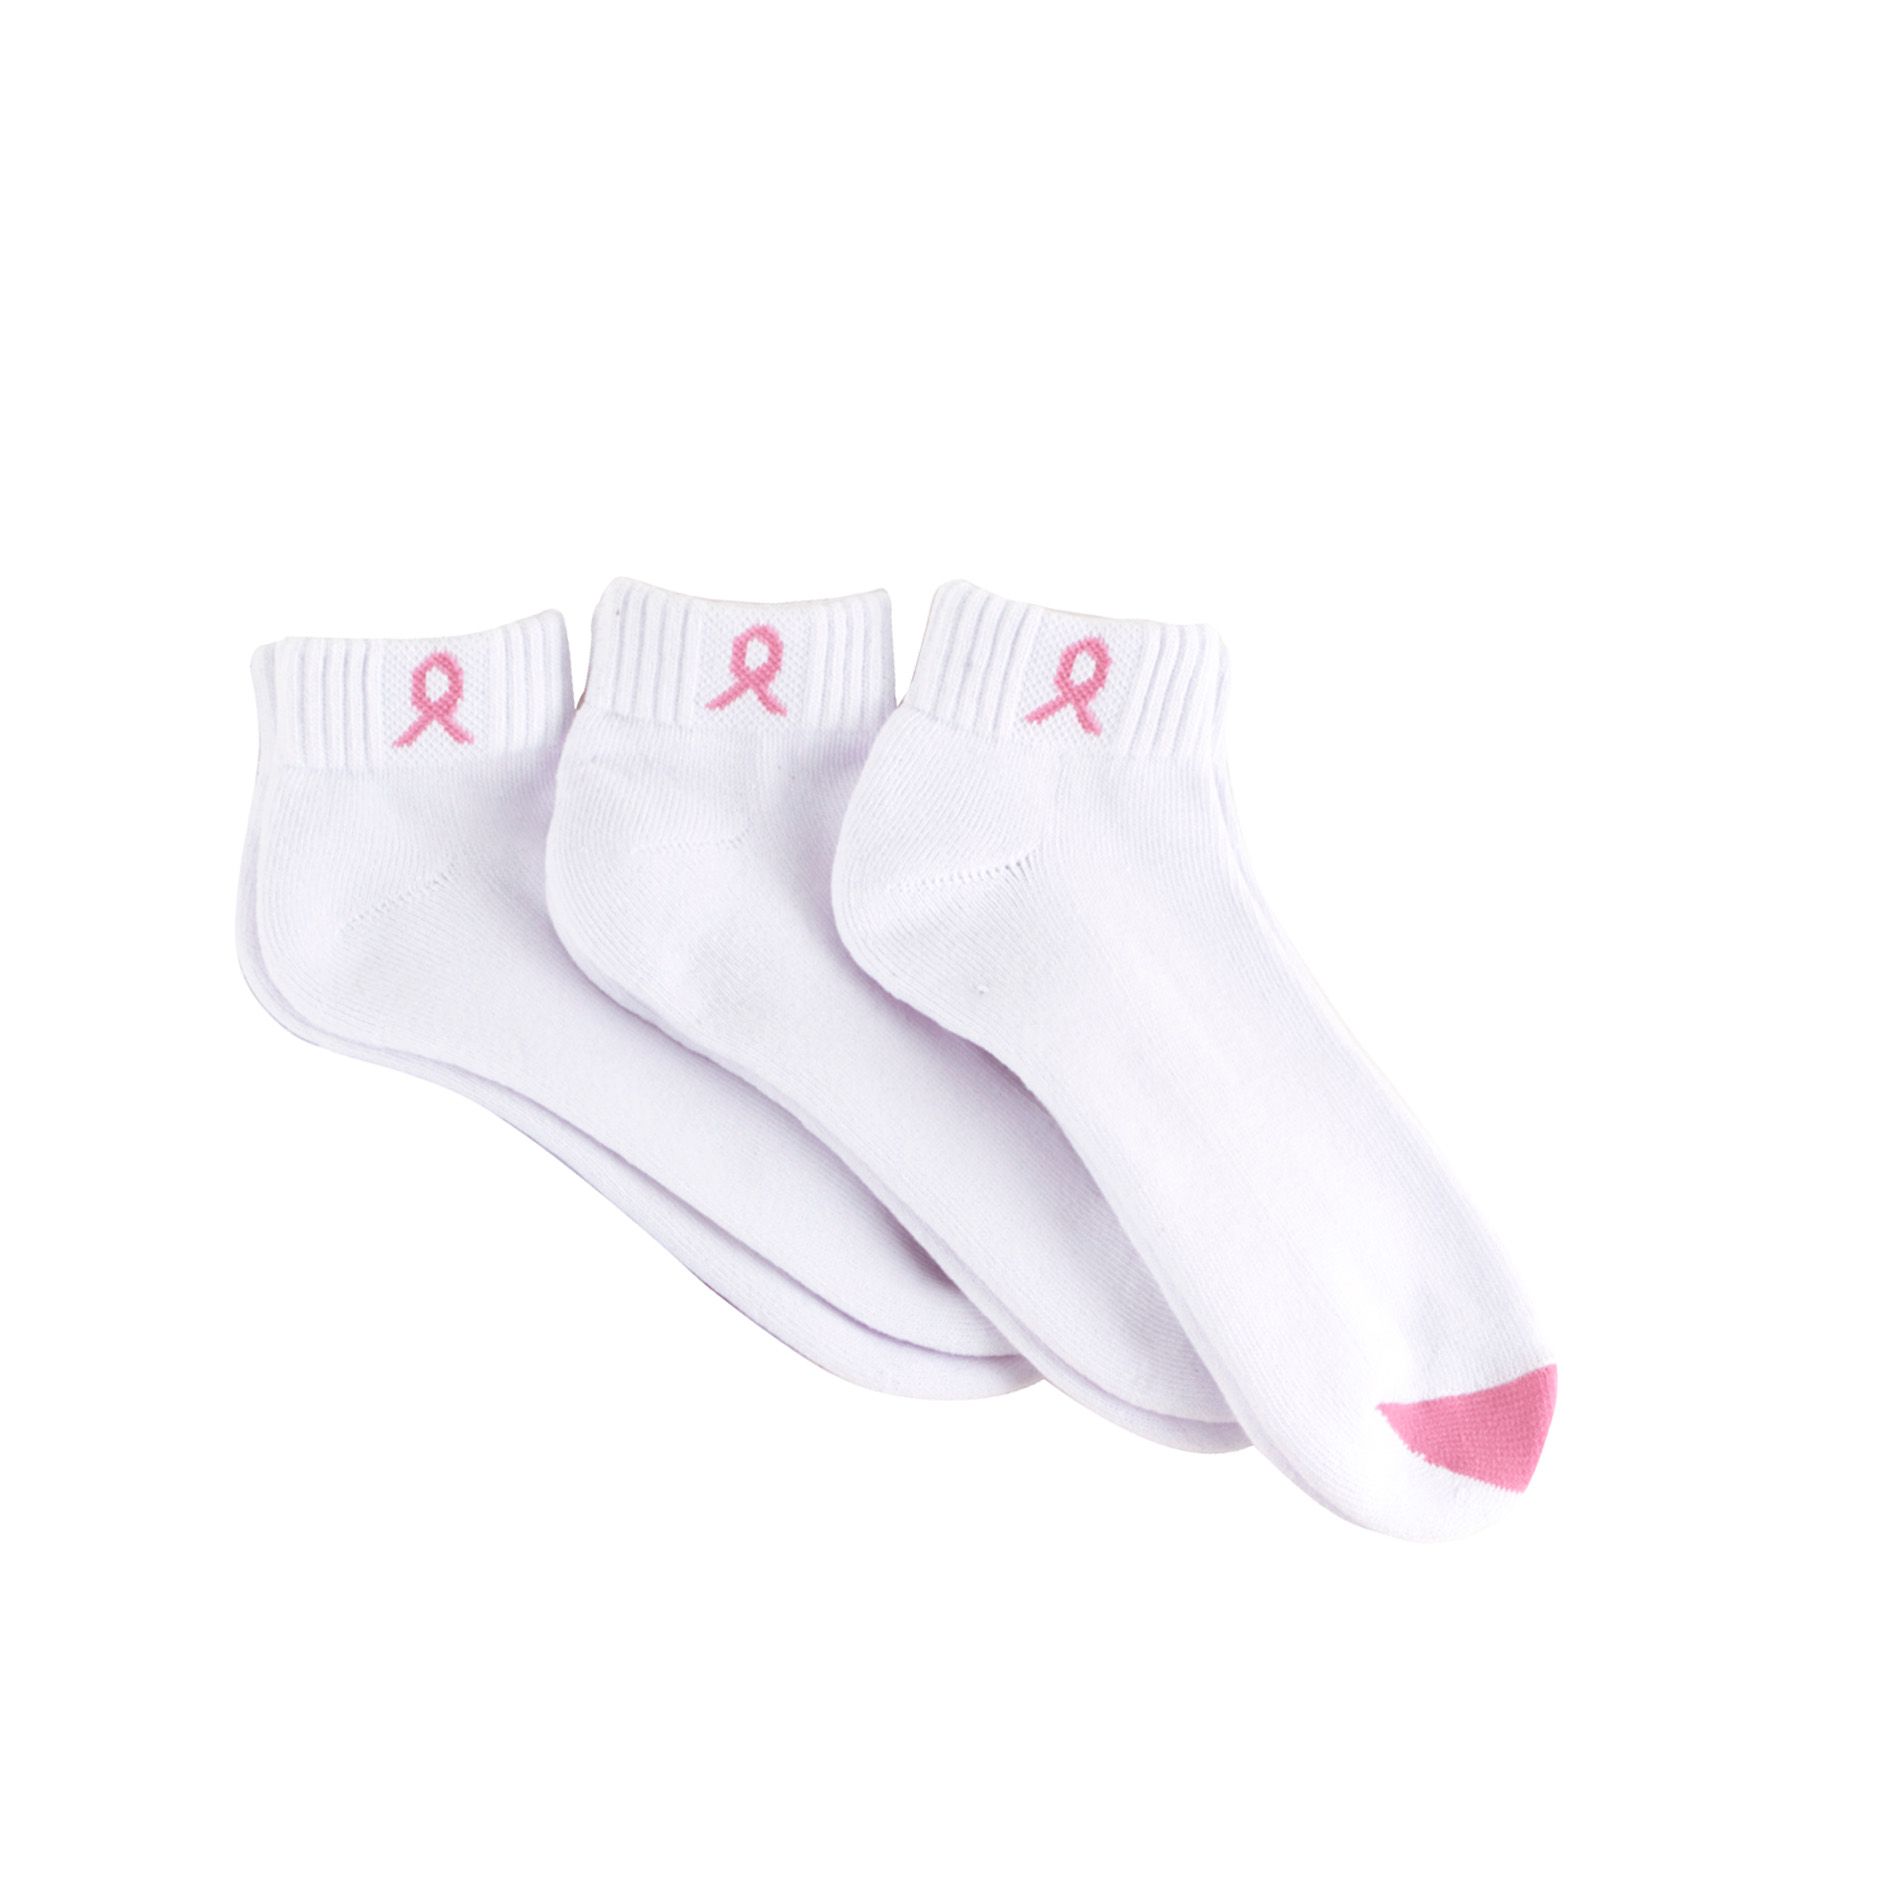 Share the Care Breast Cancer Awarenss 3 Pack Cushion Socks